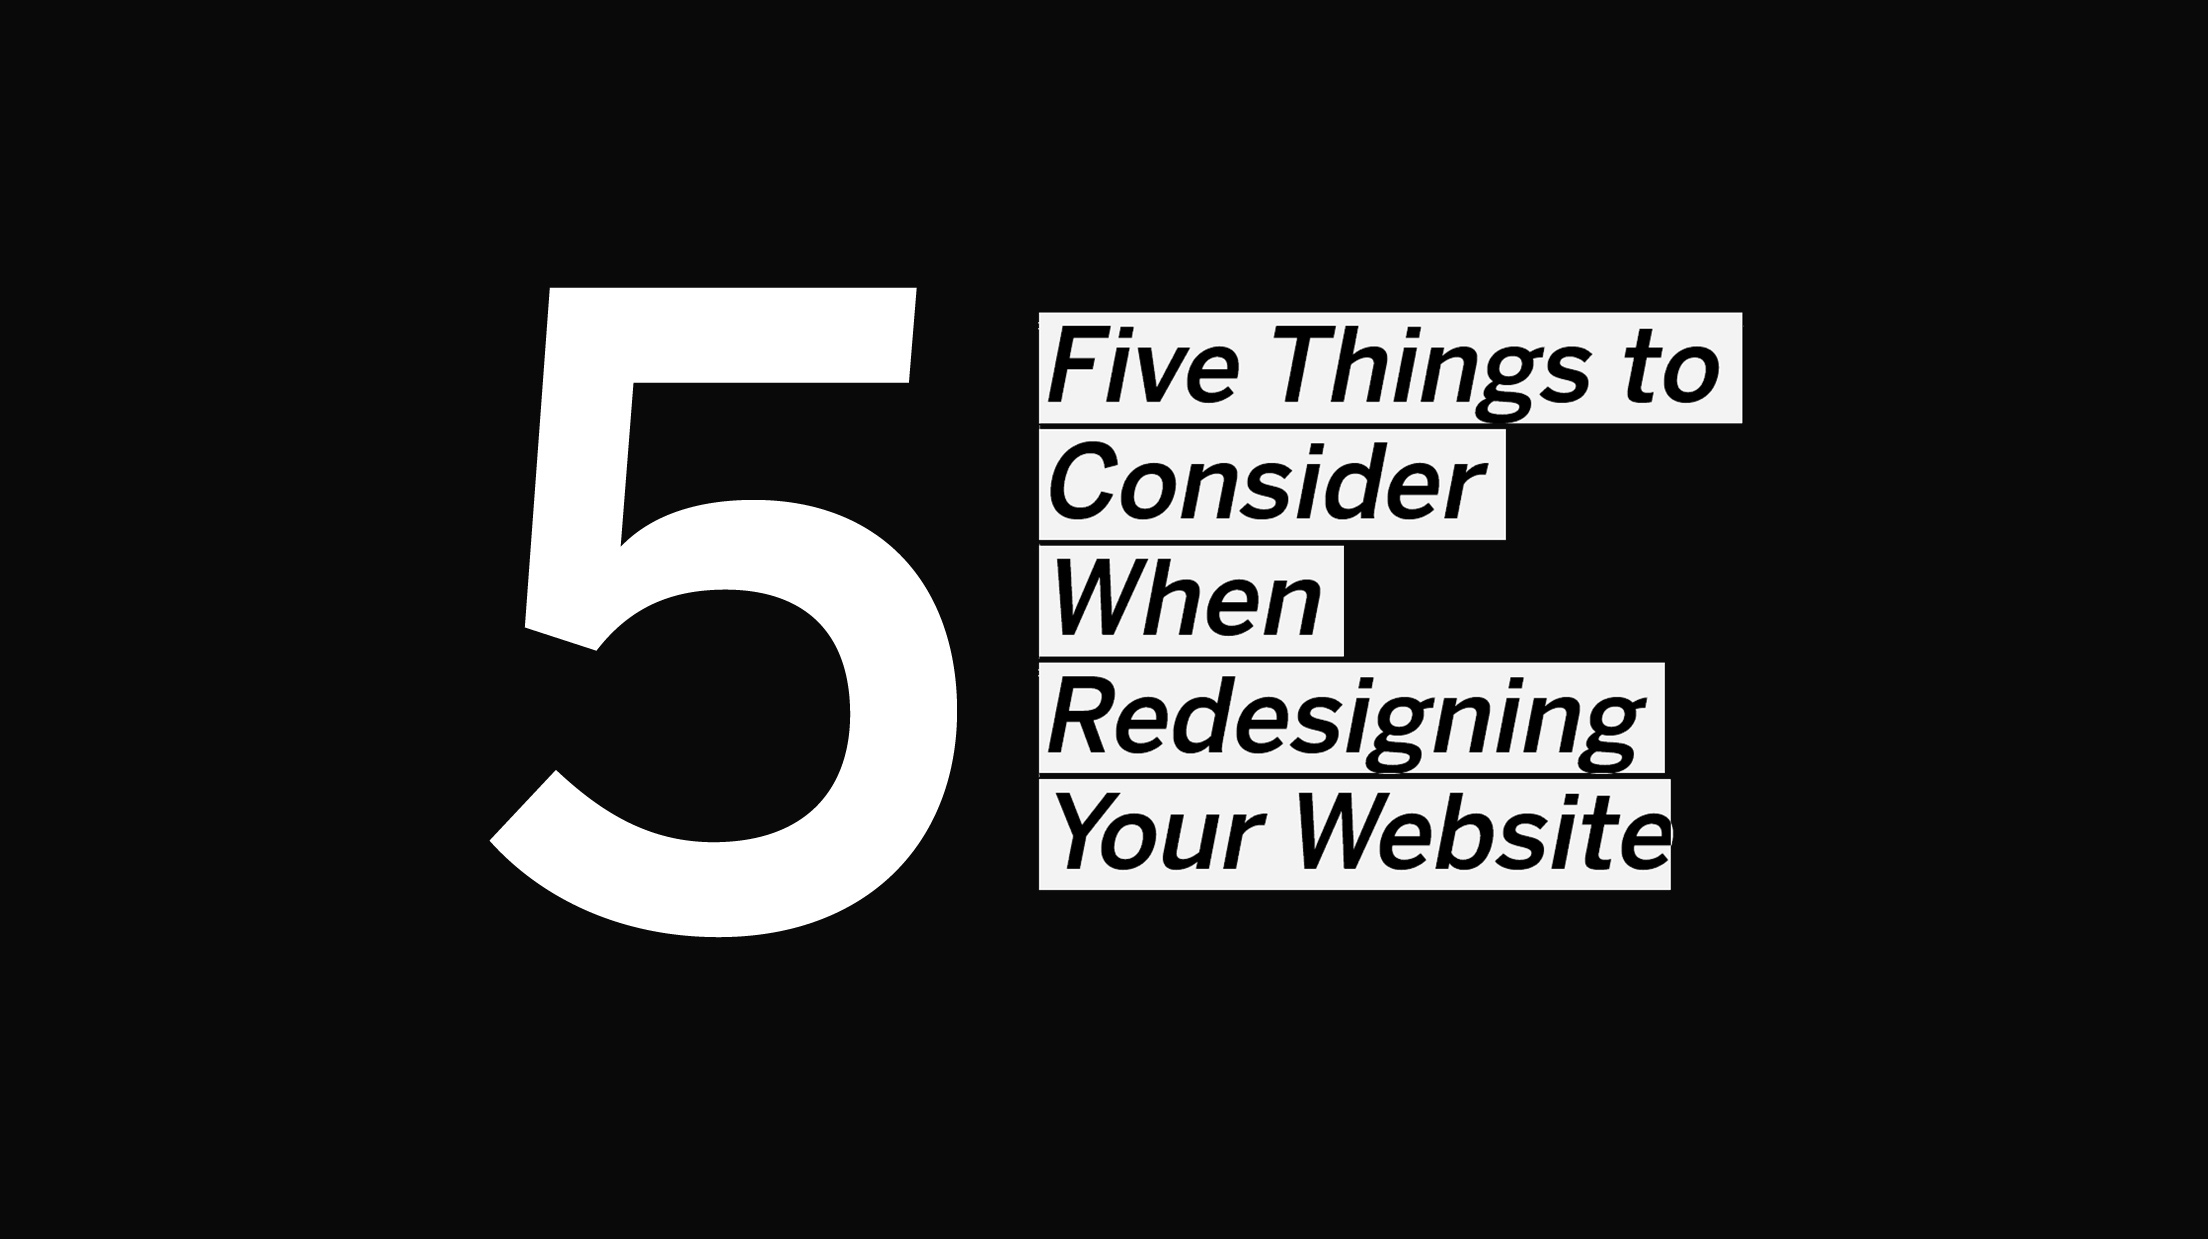 Five-Things to Consider When Redesigning Your Website